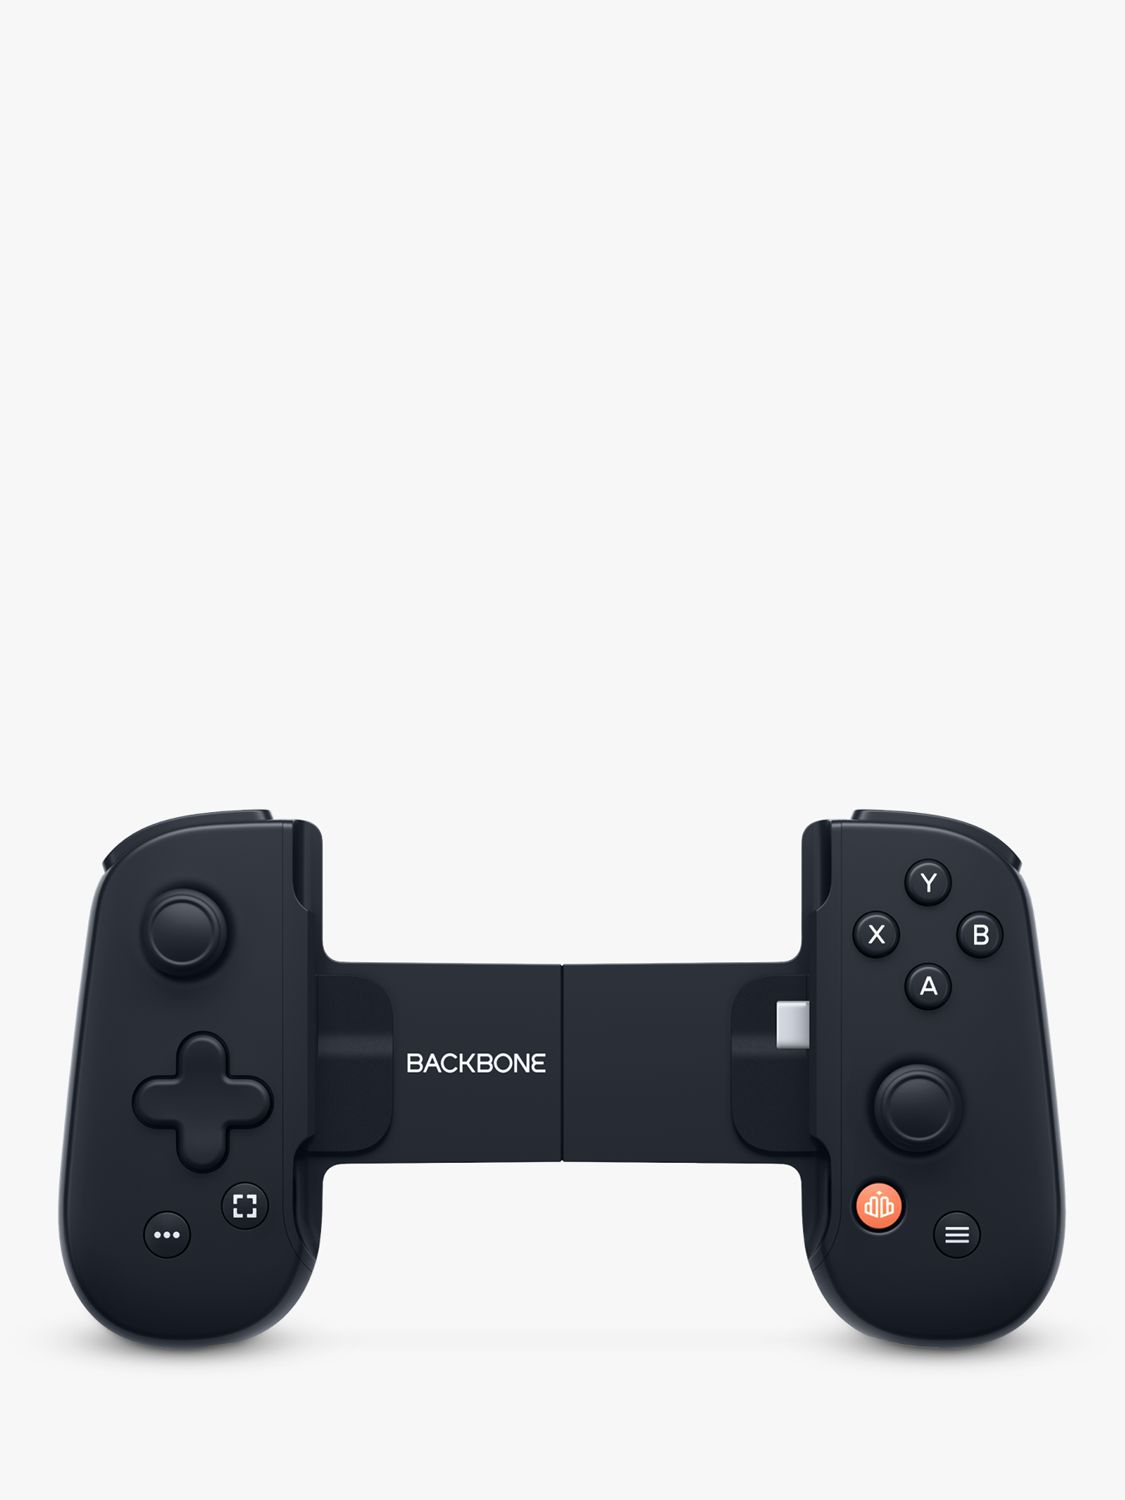 Save 25% on the Backbone One Mobile Gaming Controller With This Holiday  Deal - CNET